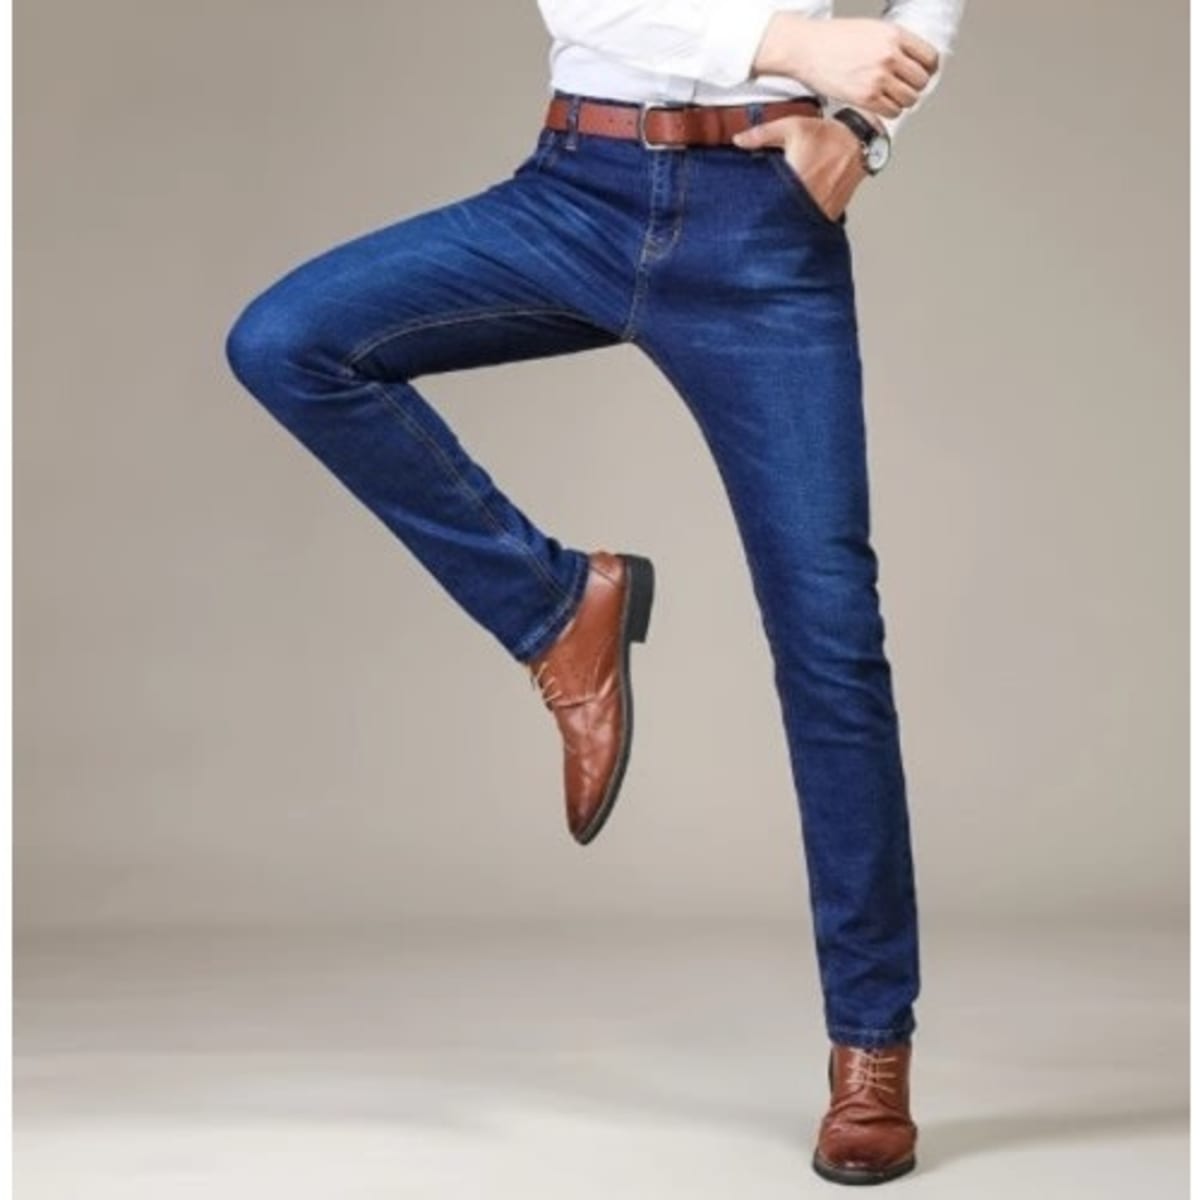 Buy Regular Fit Men Trousers White and Royal Blue Combo of 2 Polyester  Blend for Best Price, Reviews, Free Shipping